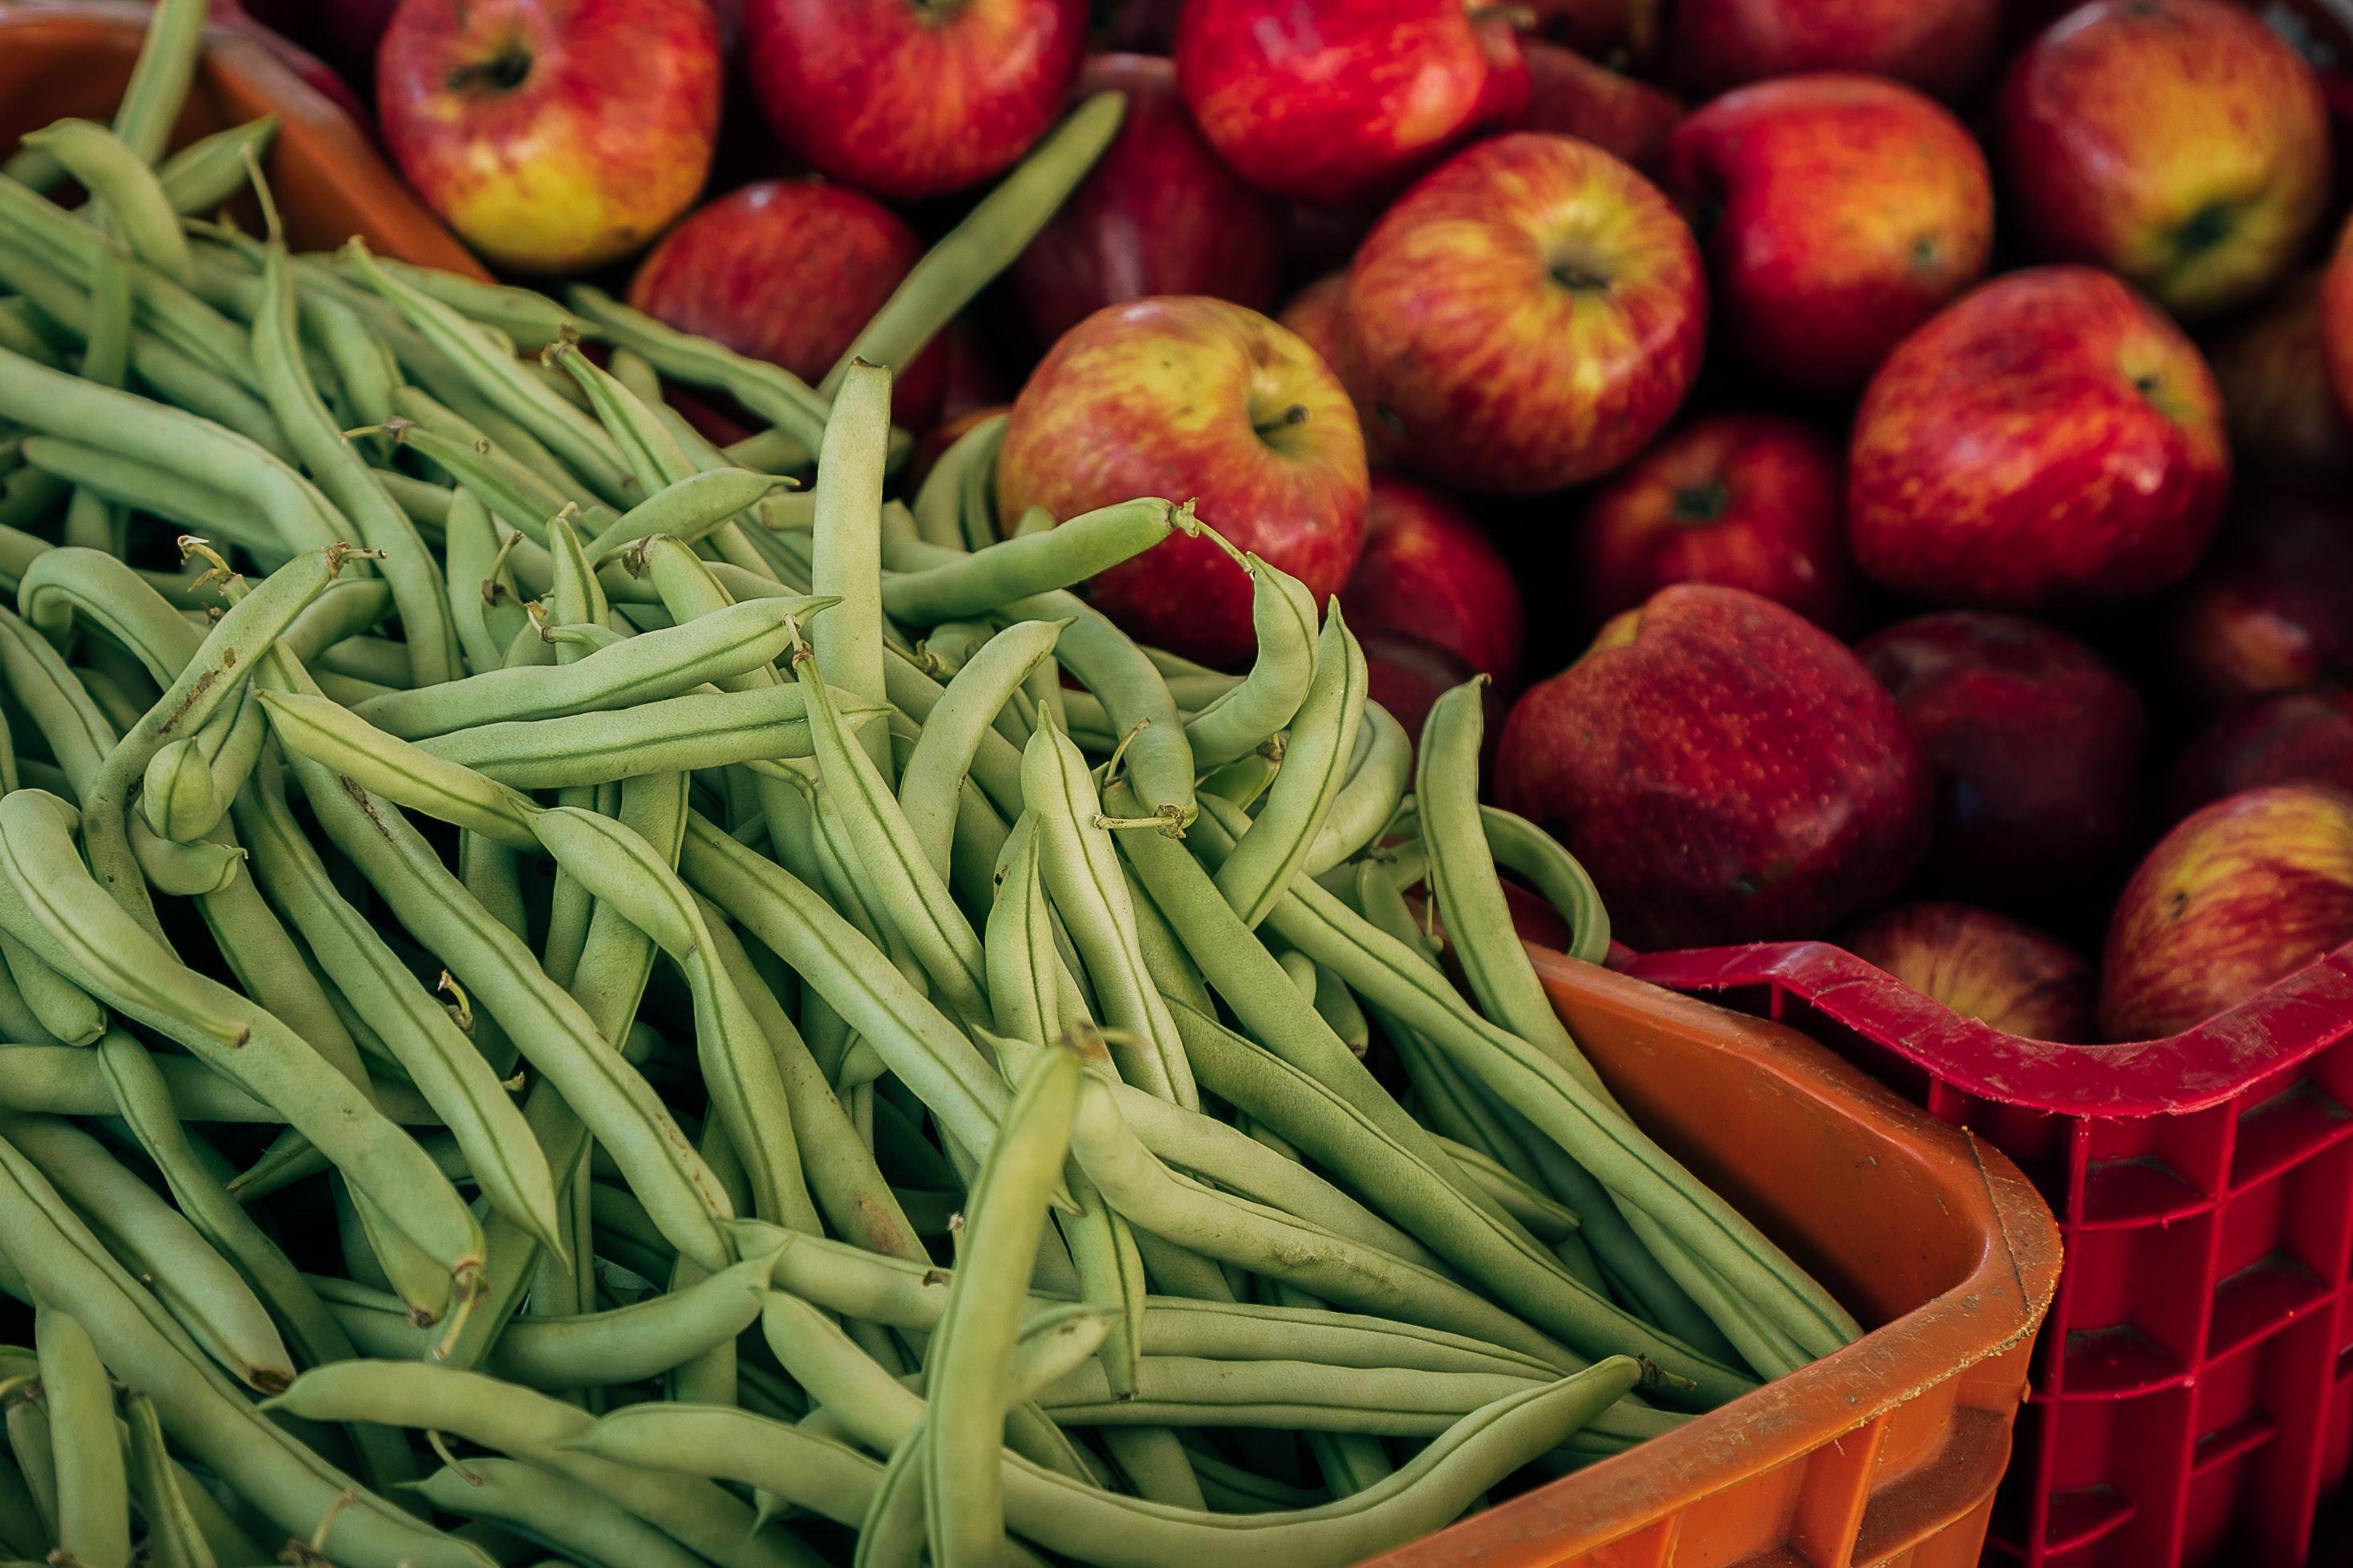 How much is a bushel of green beans? 